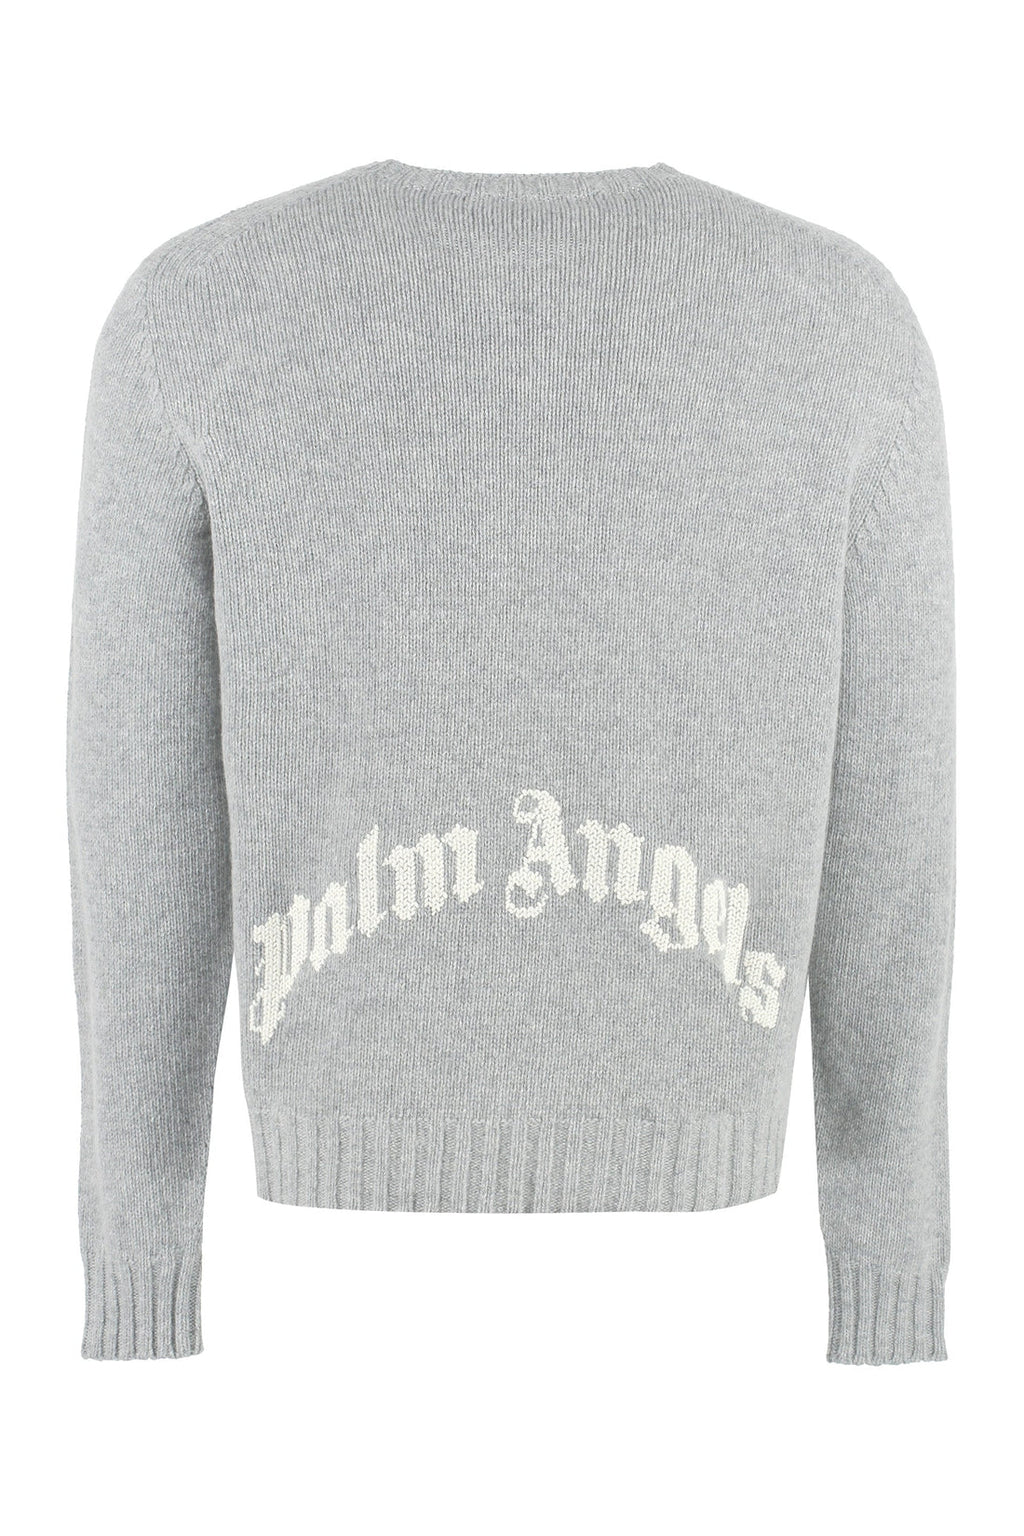 Palm Angels-OUTLET-SALE-Wool blend pullover-ARCHIVIST